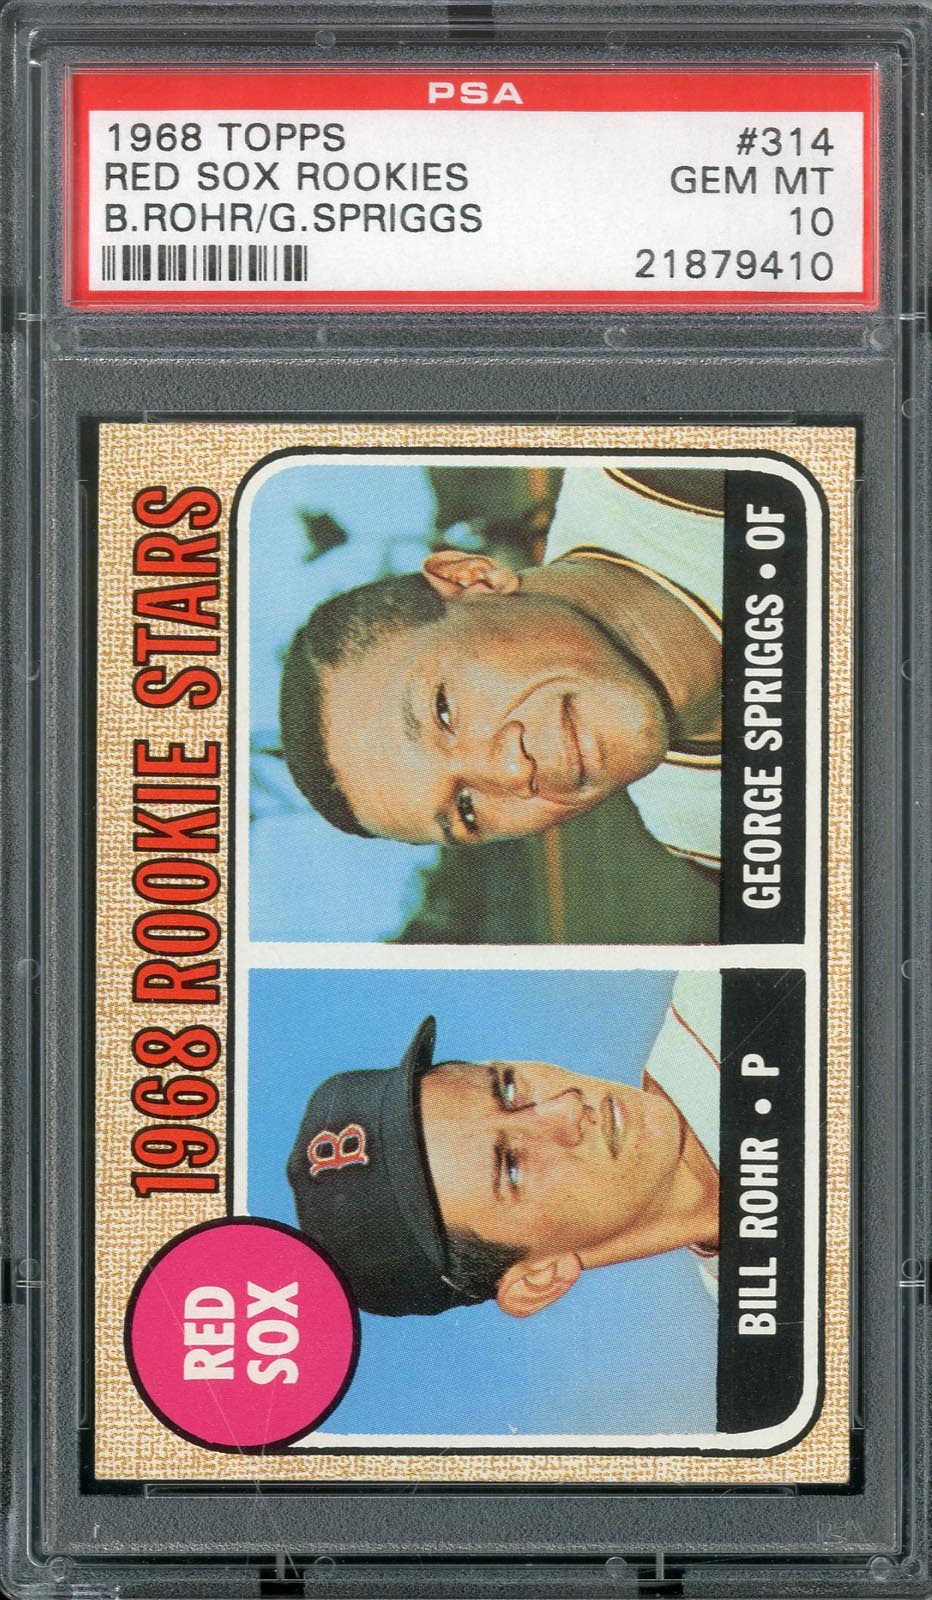 Baseball and Trading Cards - 1968 Topps #314 Red Sox Rookies PSA GEM MINT 10 (Pop 3)